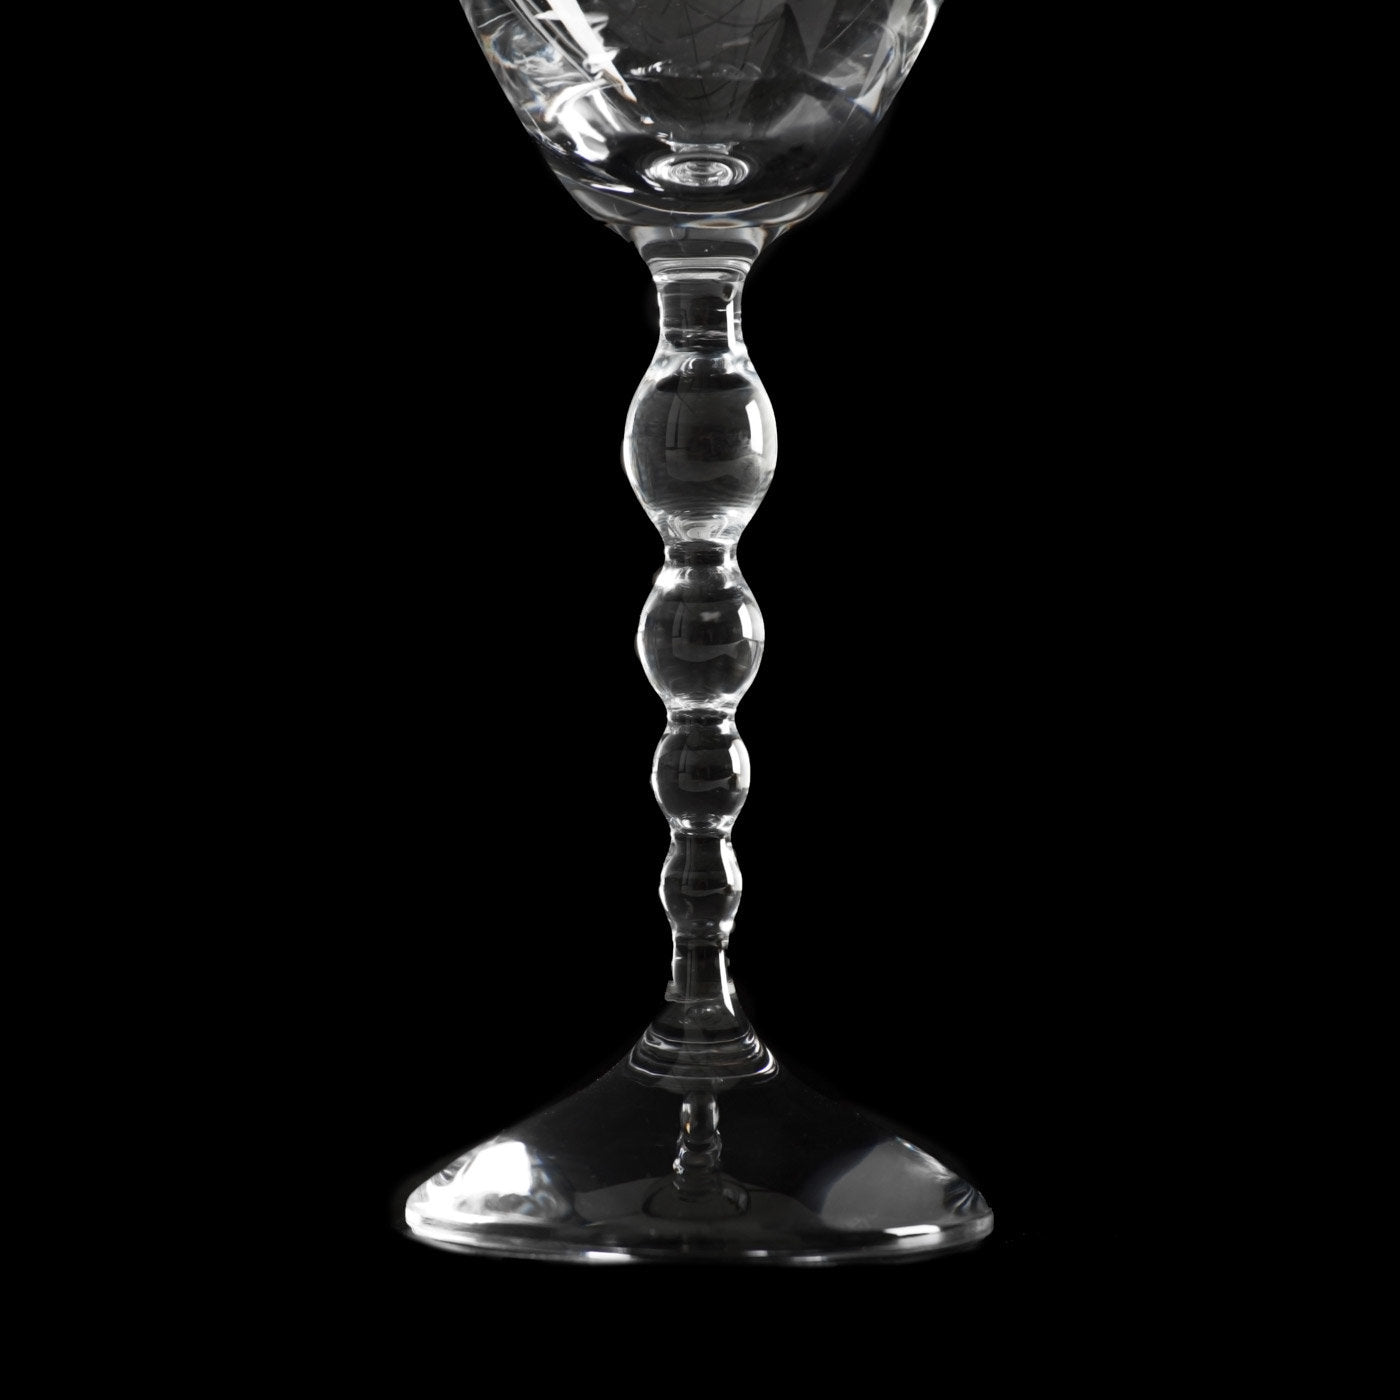 Set of 6 Collier Crystal Wine Glasses - Alternative view 2